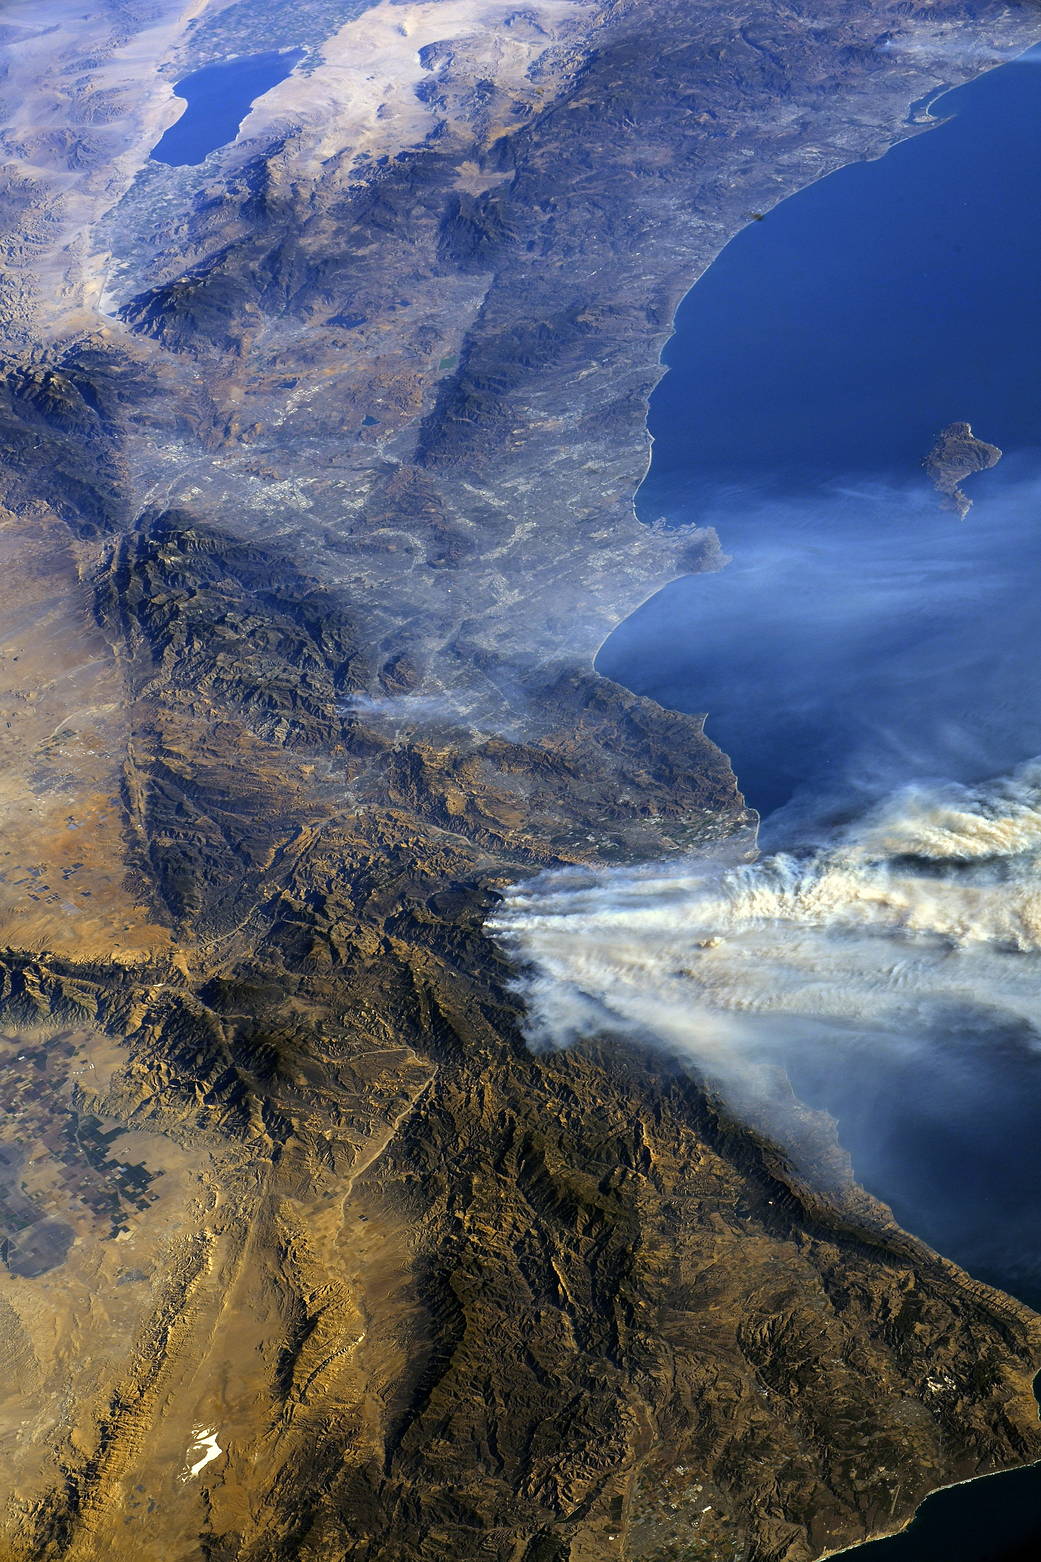 Space station view of wildfires